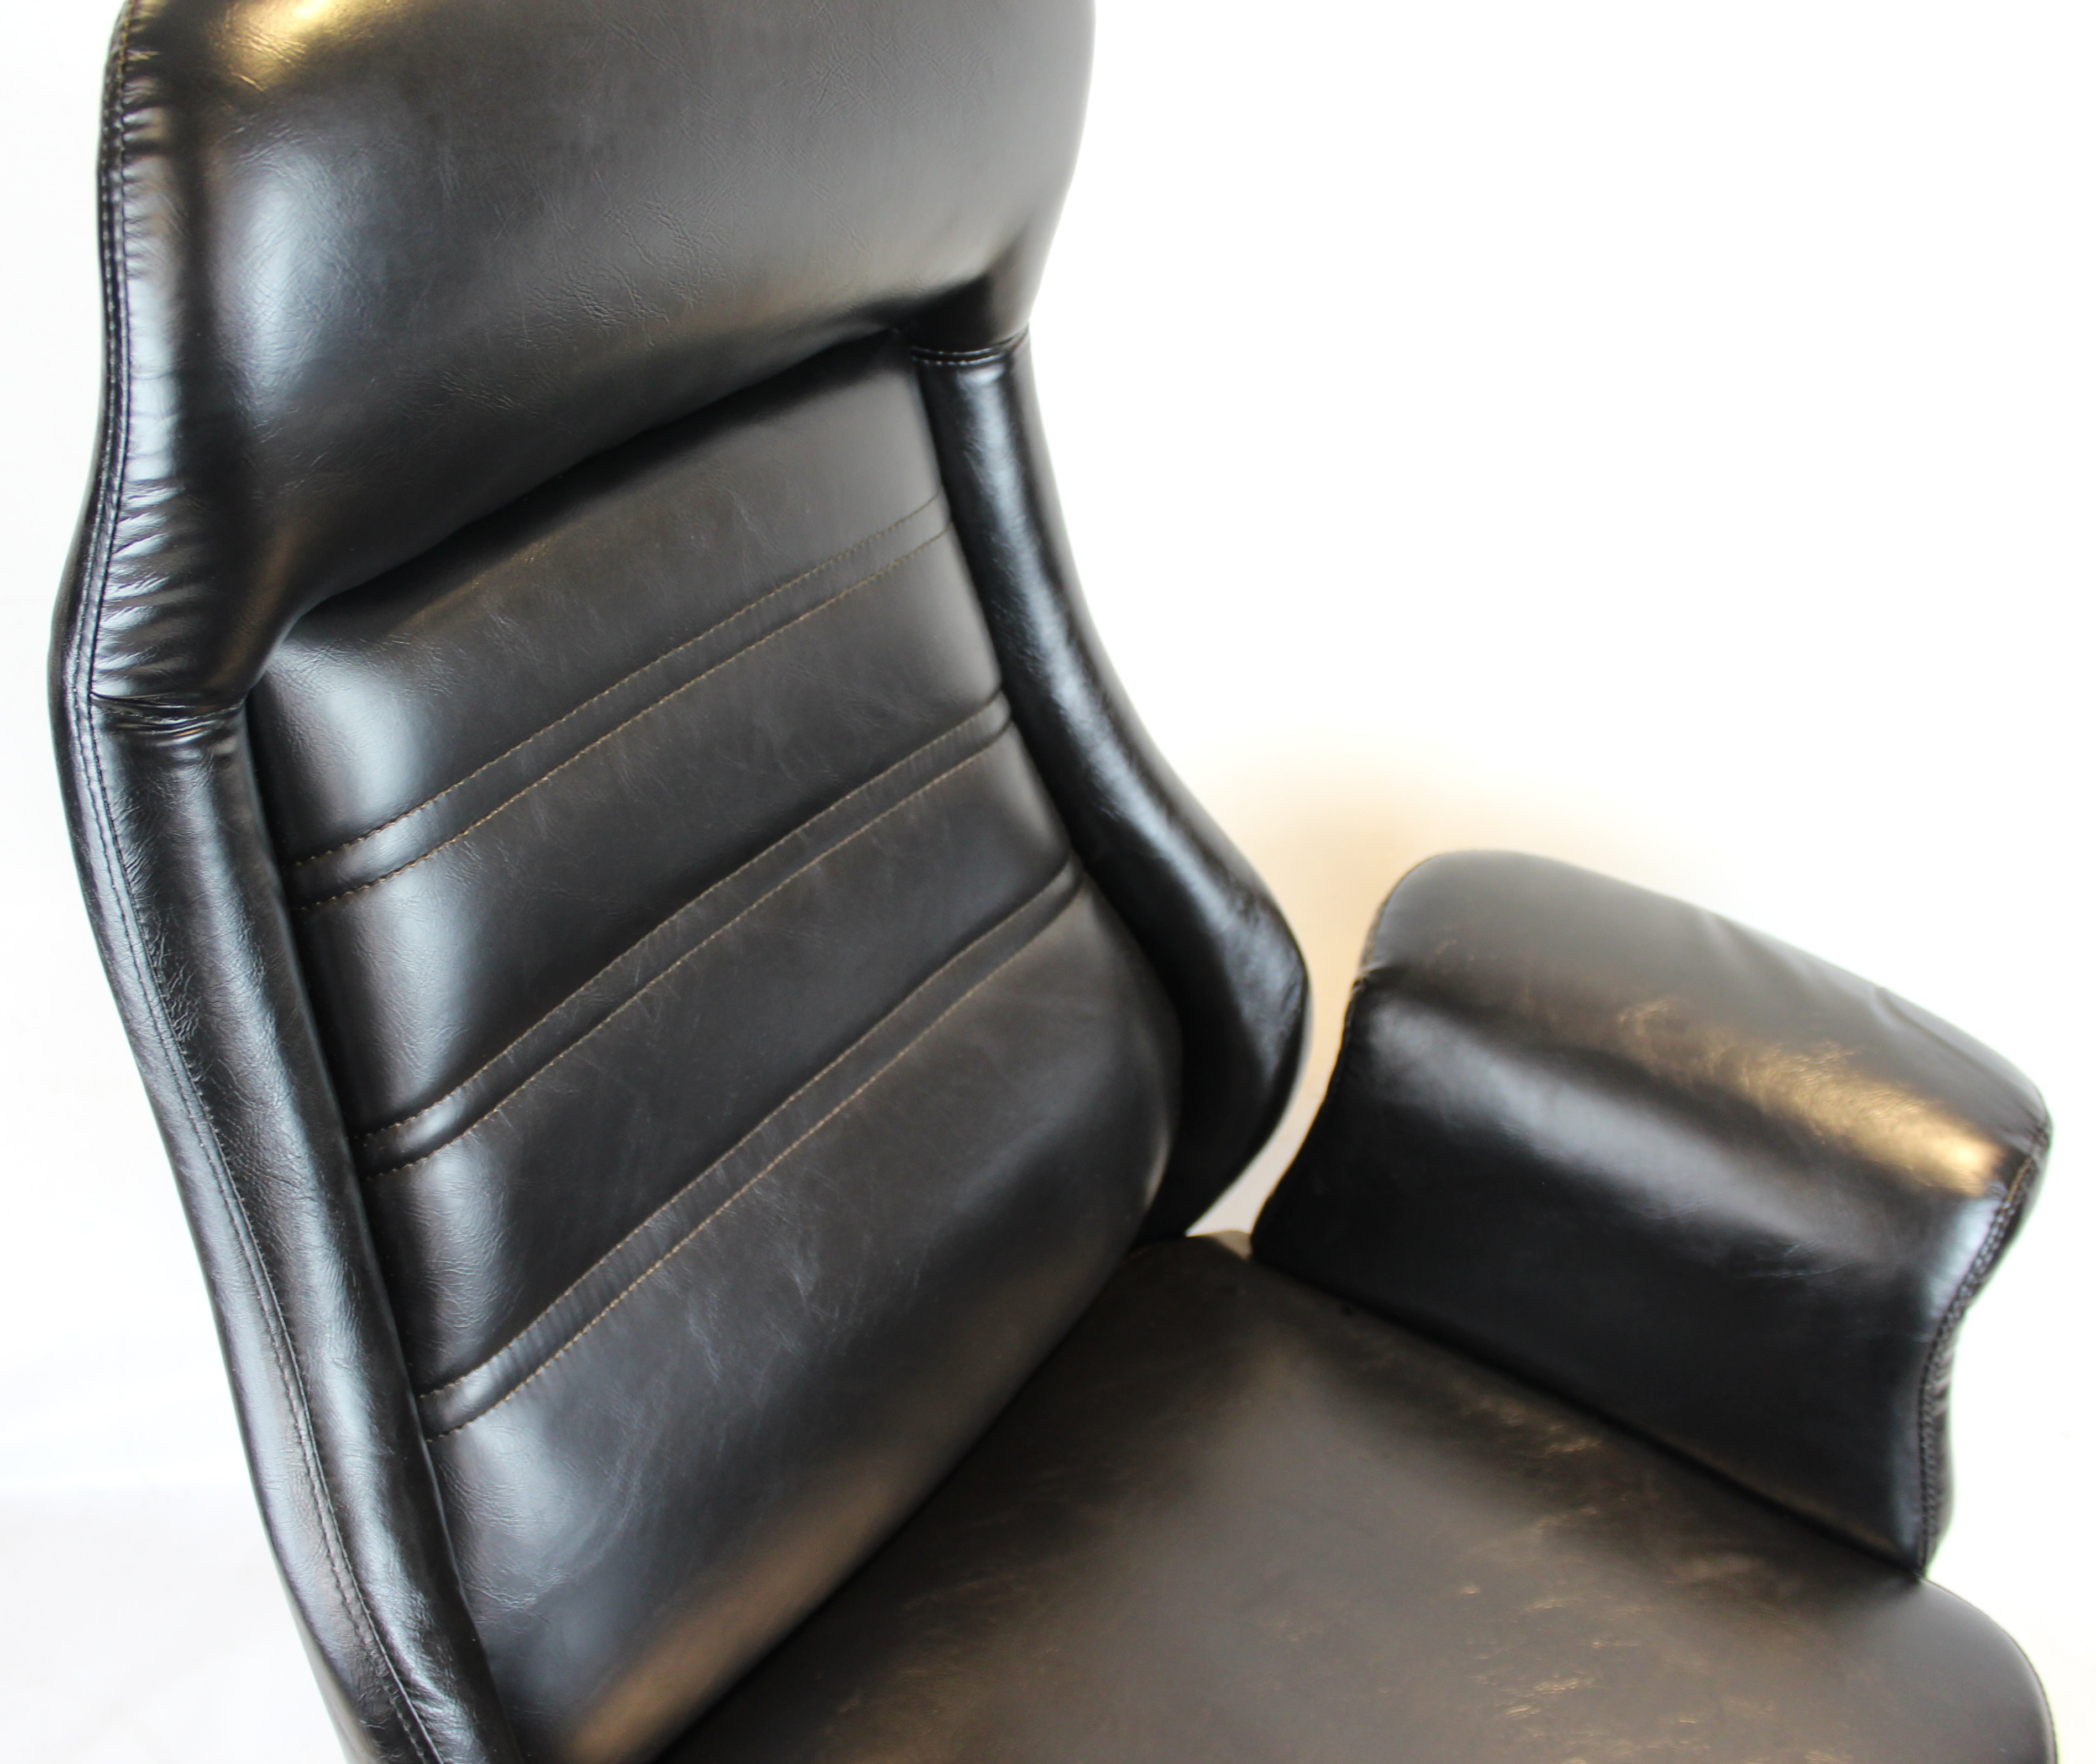 Black Leather Executive Office Chair - DH-090